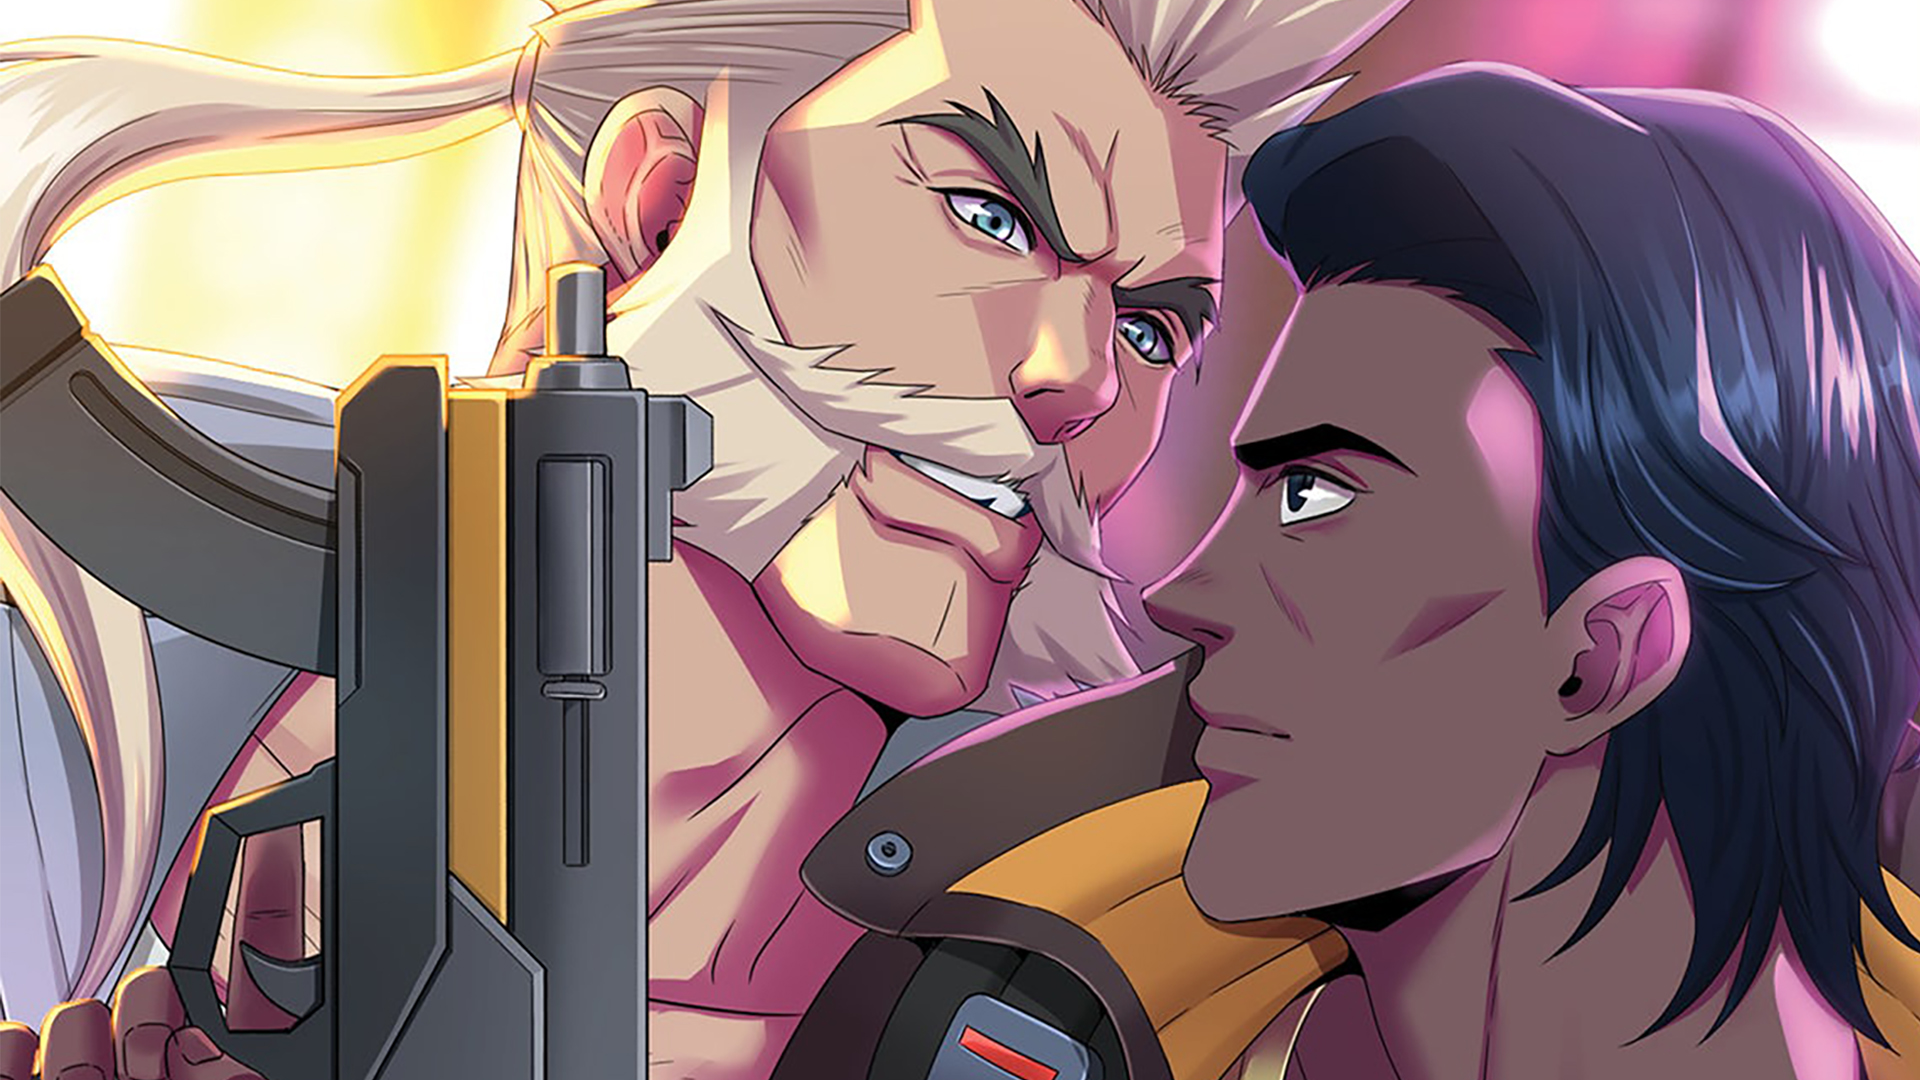 Captain Laserhawk: A Blood Dragon Remix is a show coming to Netflix this  Fall